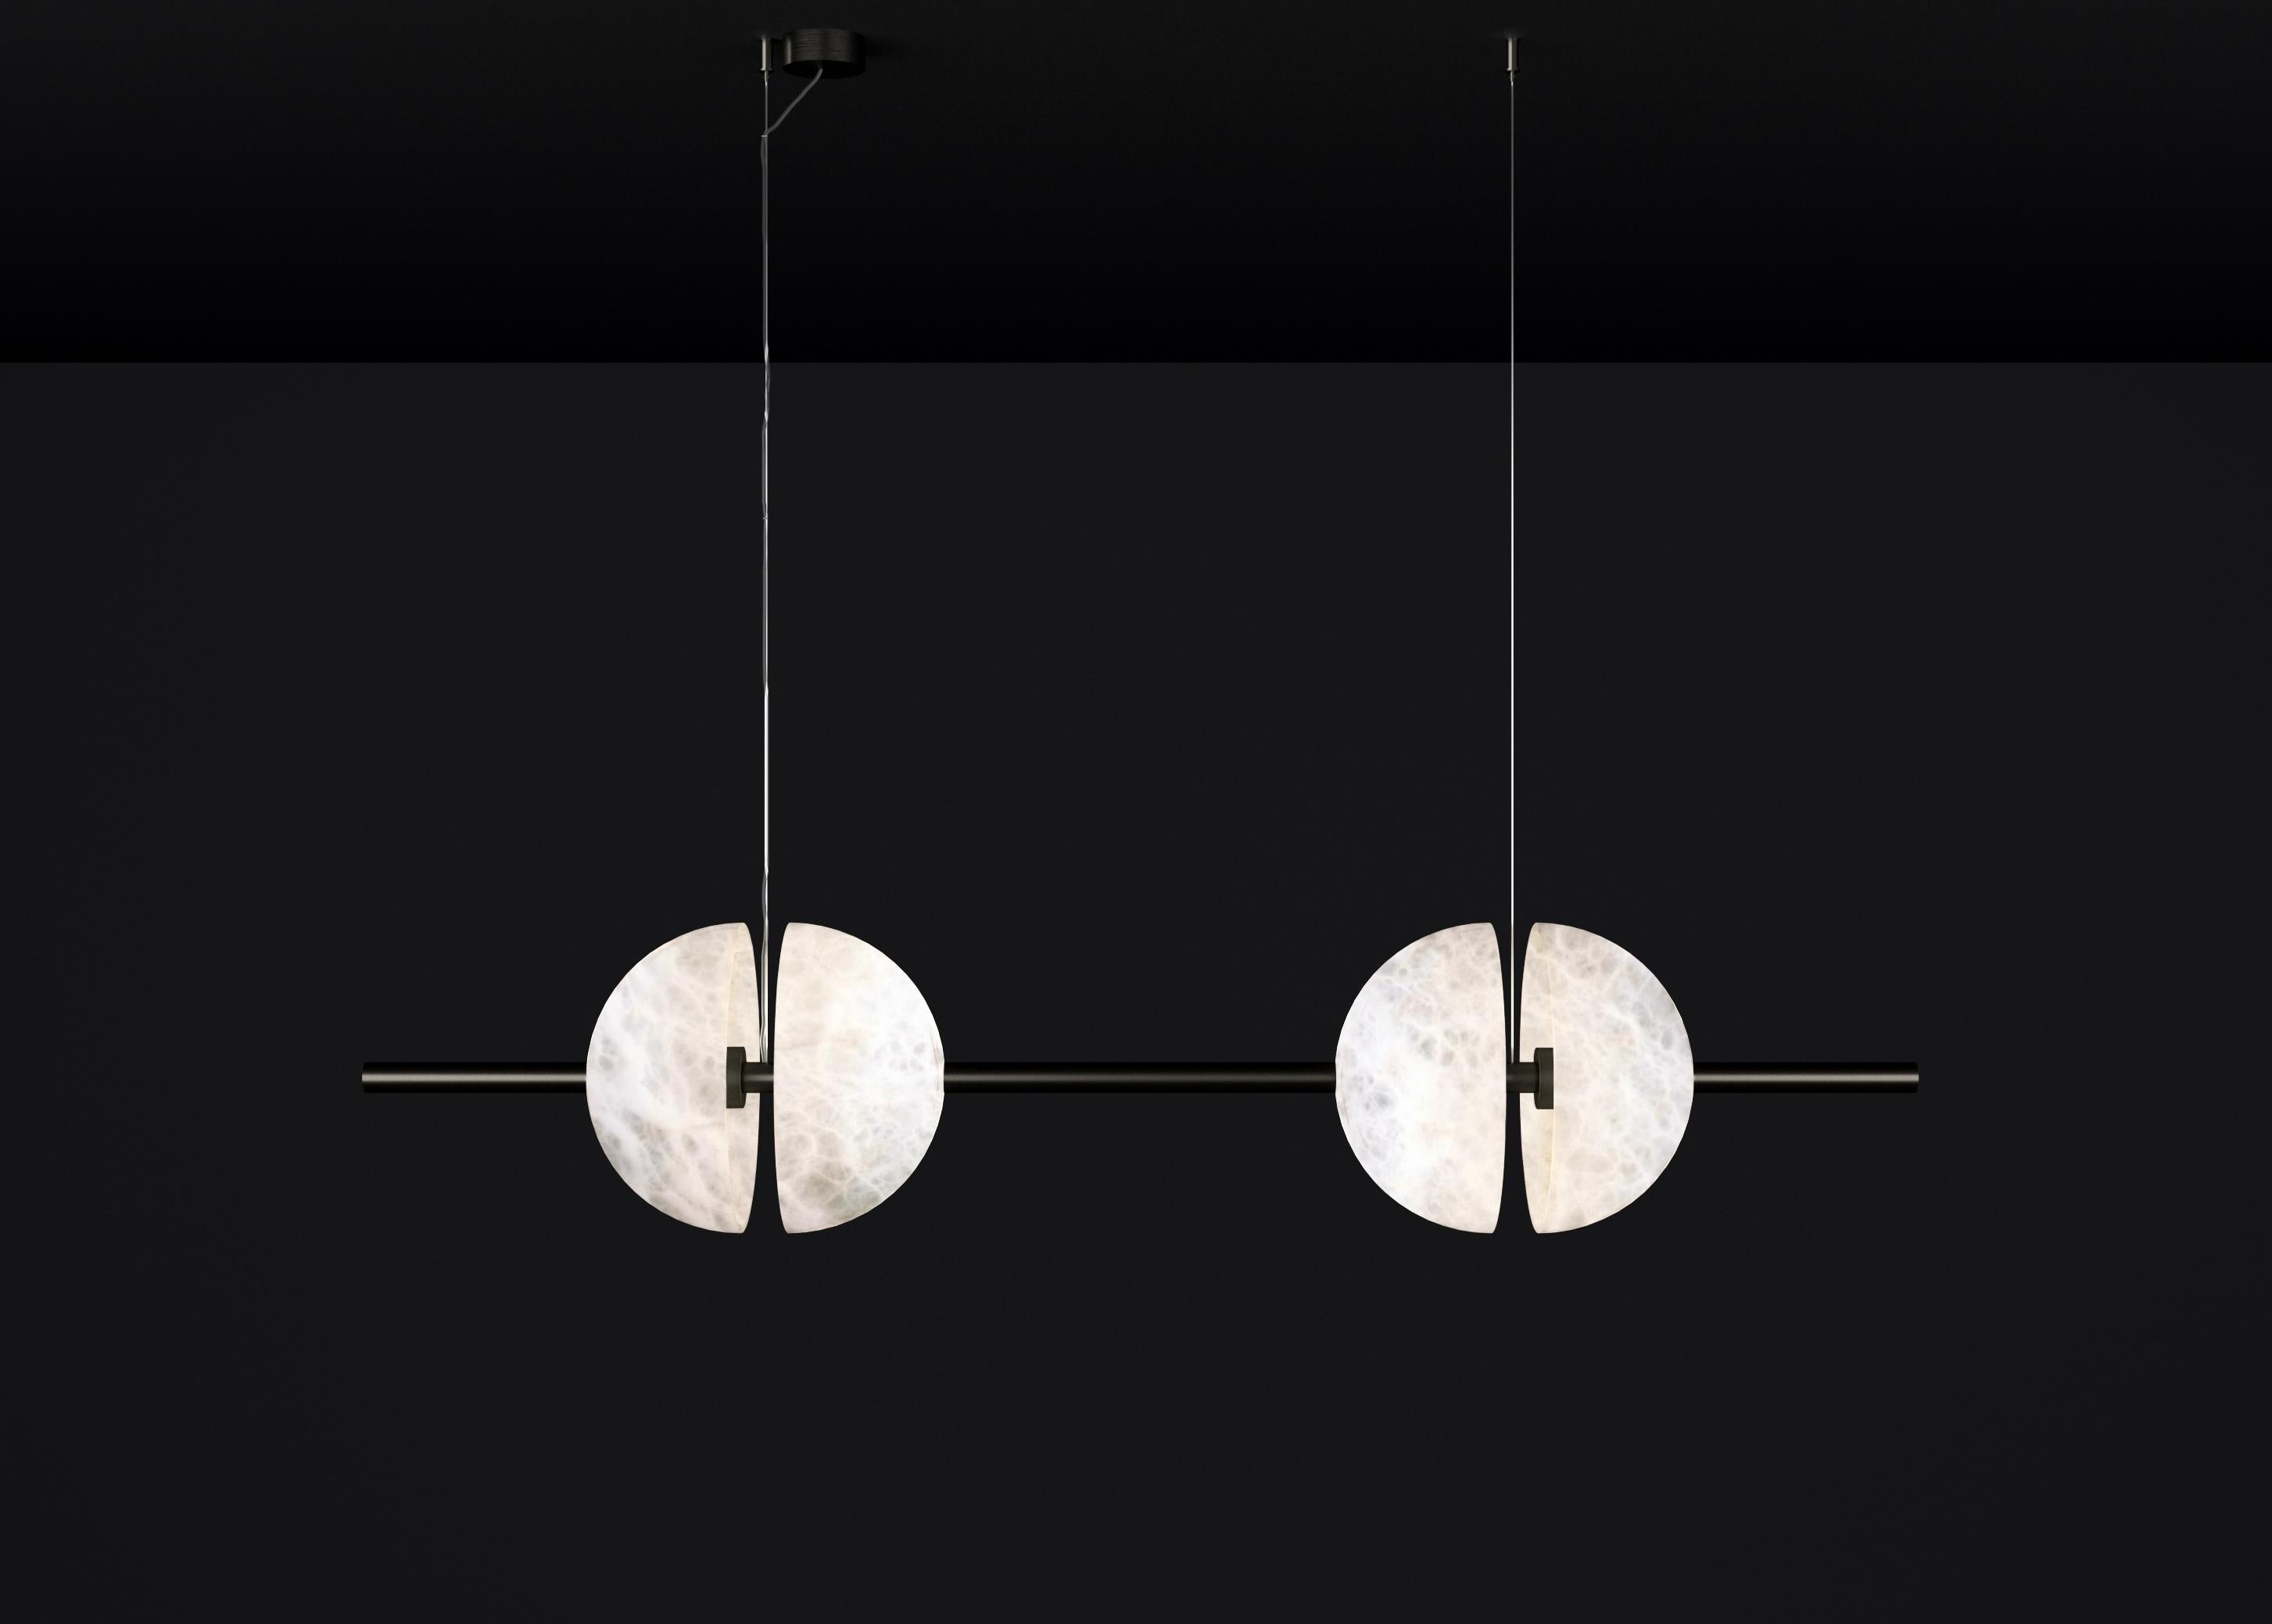 Ermes Brushed Black Metal And Alabaster Pendant Light 1 by Alabastro Italiano
Dimensions: D 30 x W 150 x H 300 cm.
Materials: White alabaster and brushed black metal.

Available in different finishes: Shiny Silver, Bronze, Brushed Brass, Ruggine of